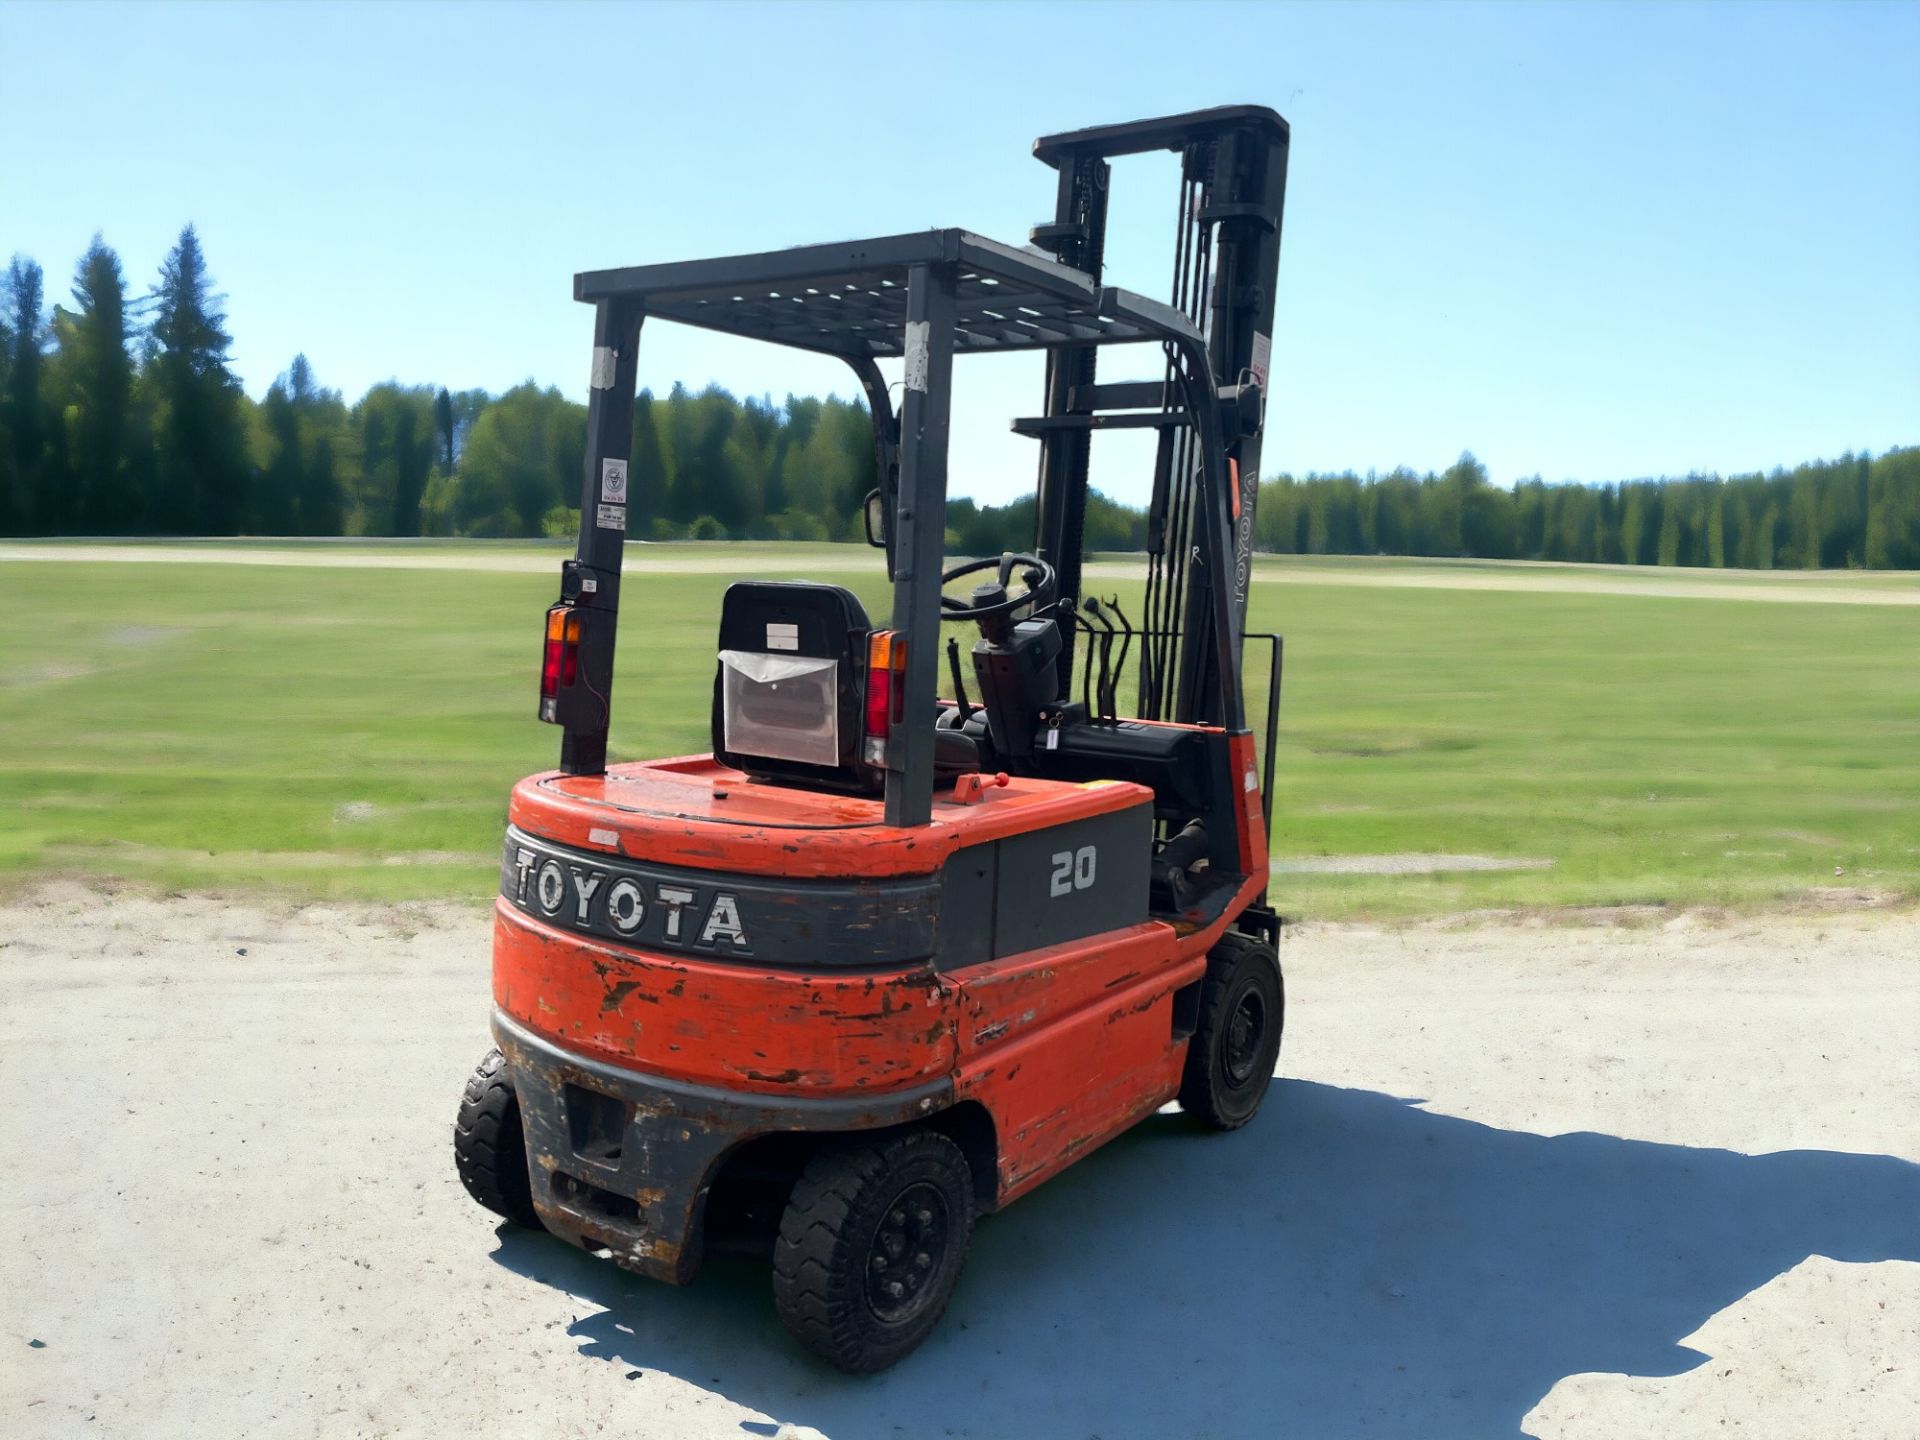 TOYOTA ELECTRIC 4-WHEEL FORKLIFT - FBM20 (2000) **(INCLUDES CHARGER)** - Image 7 of 7